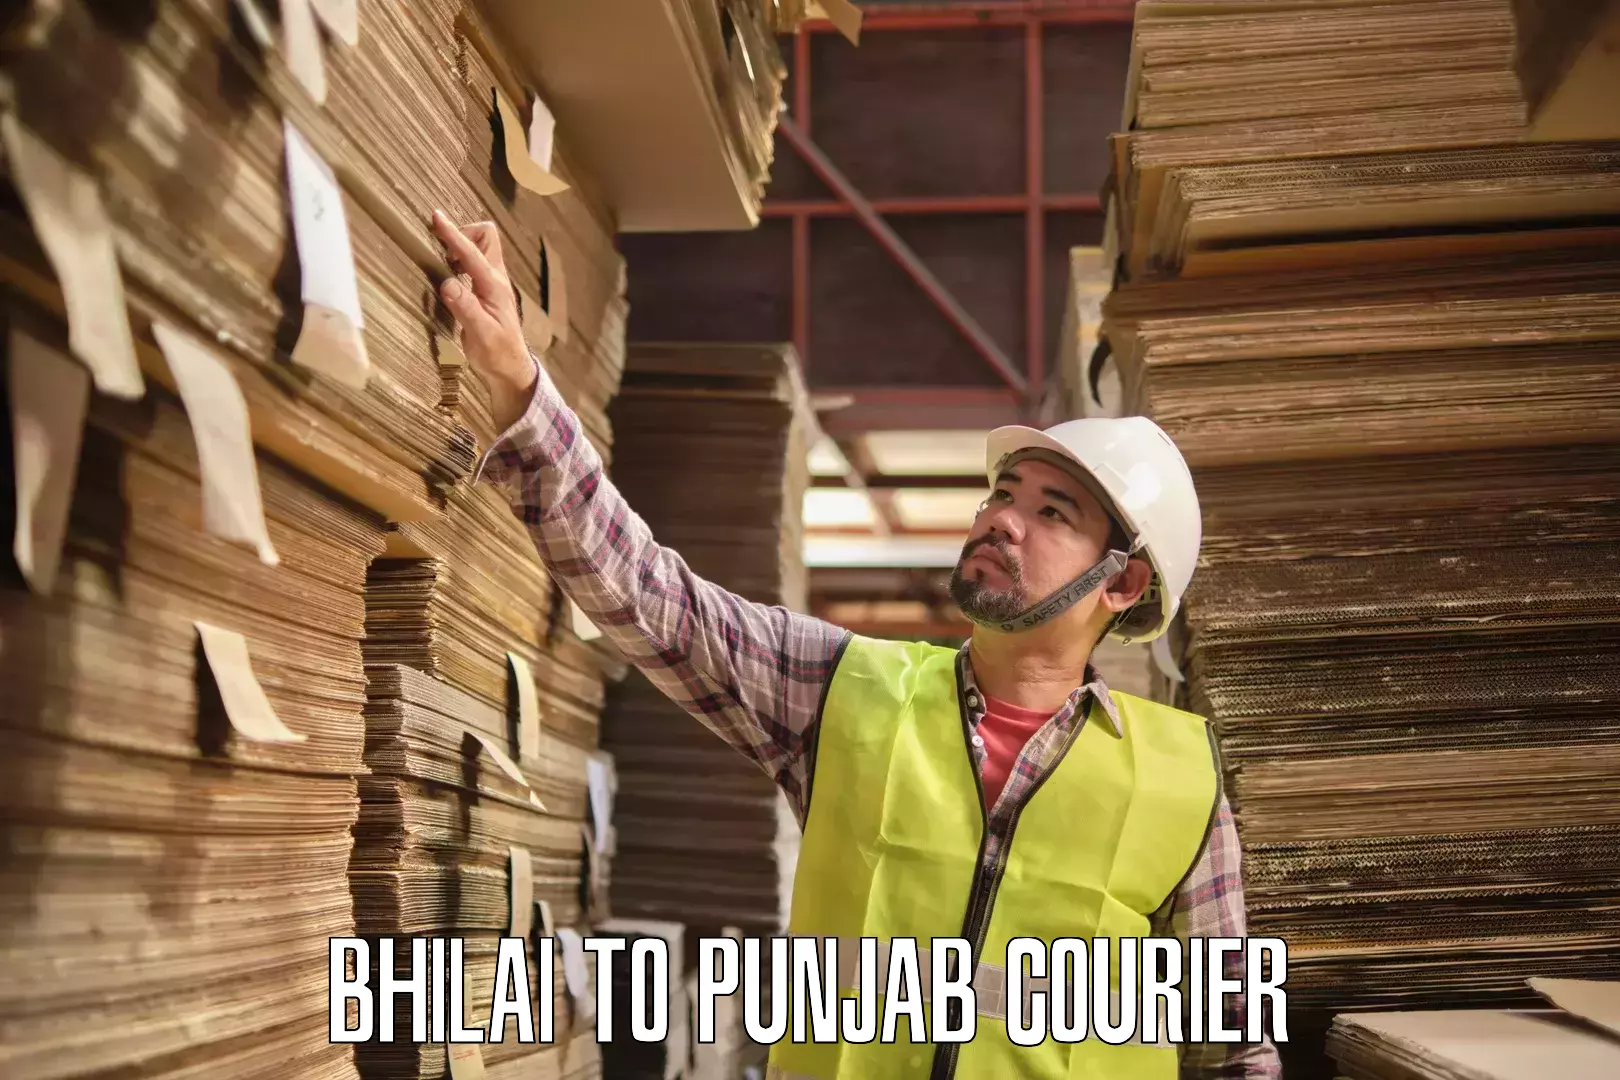 Easy access courier services in Bhilai to Moga